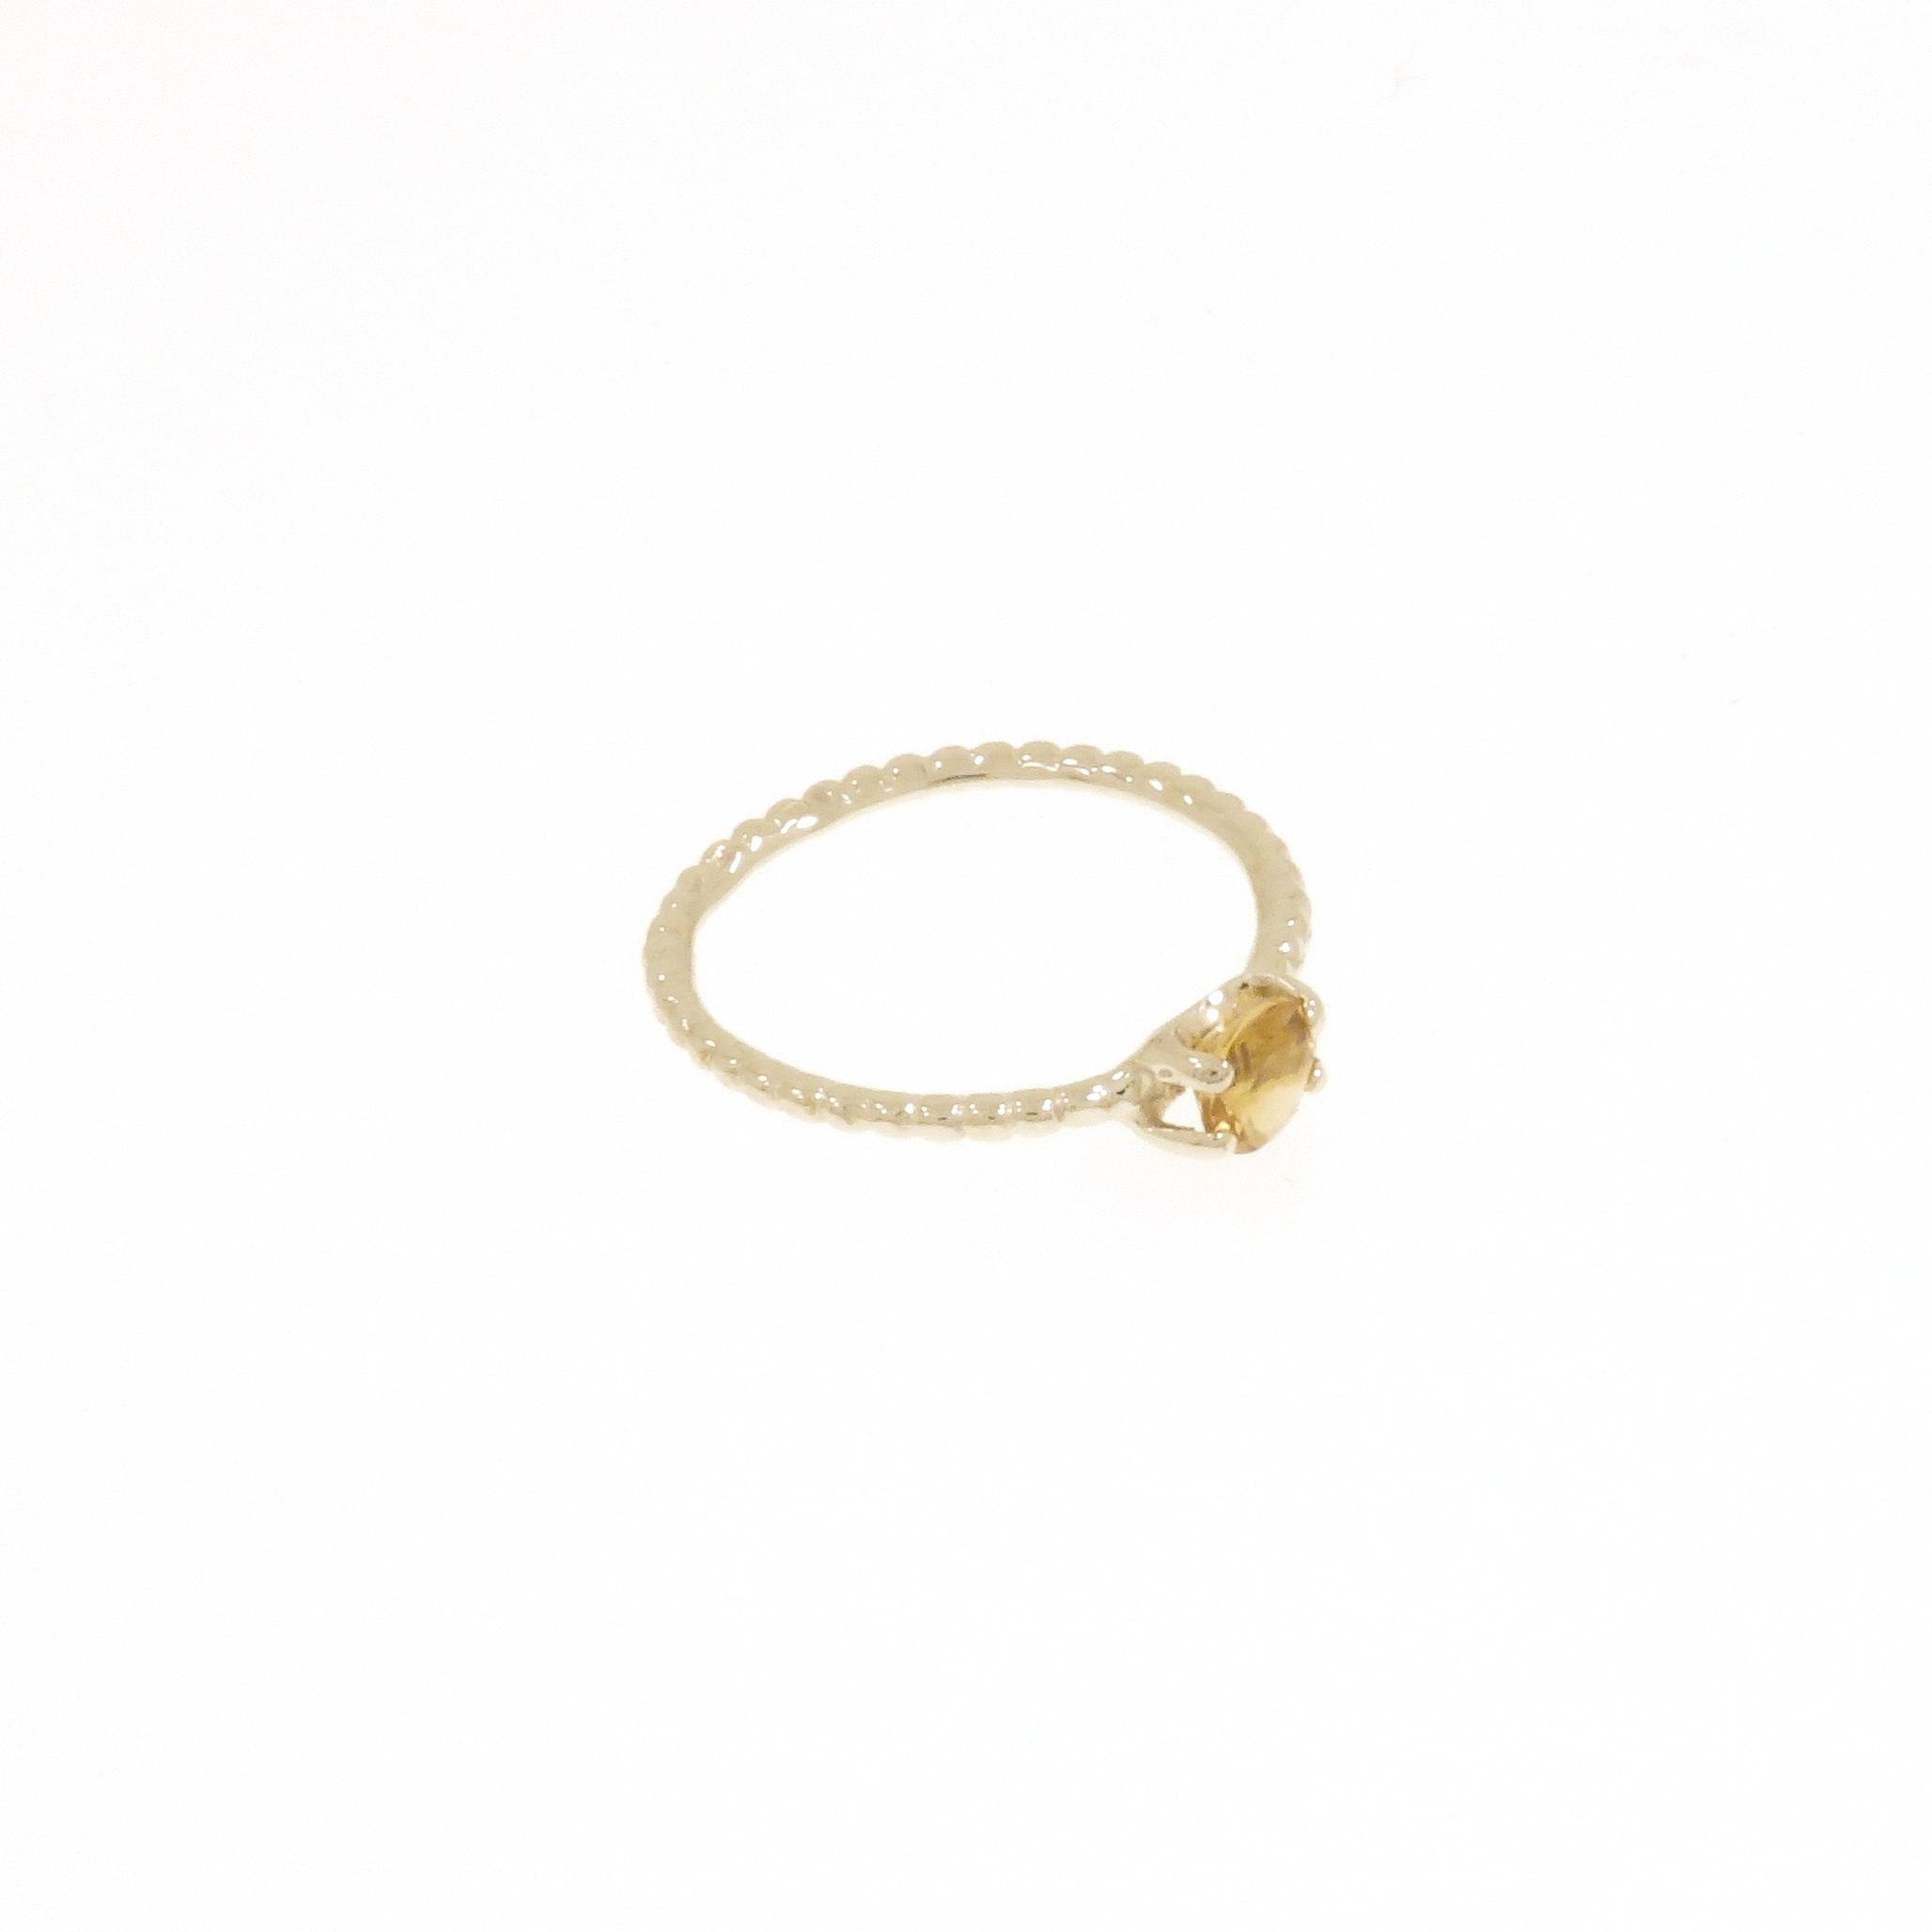 Citrine Withe Gold Stacking Ring Handcrafted in Italy by Botta Gioielli In New Condition For Sale In Milano, IT